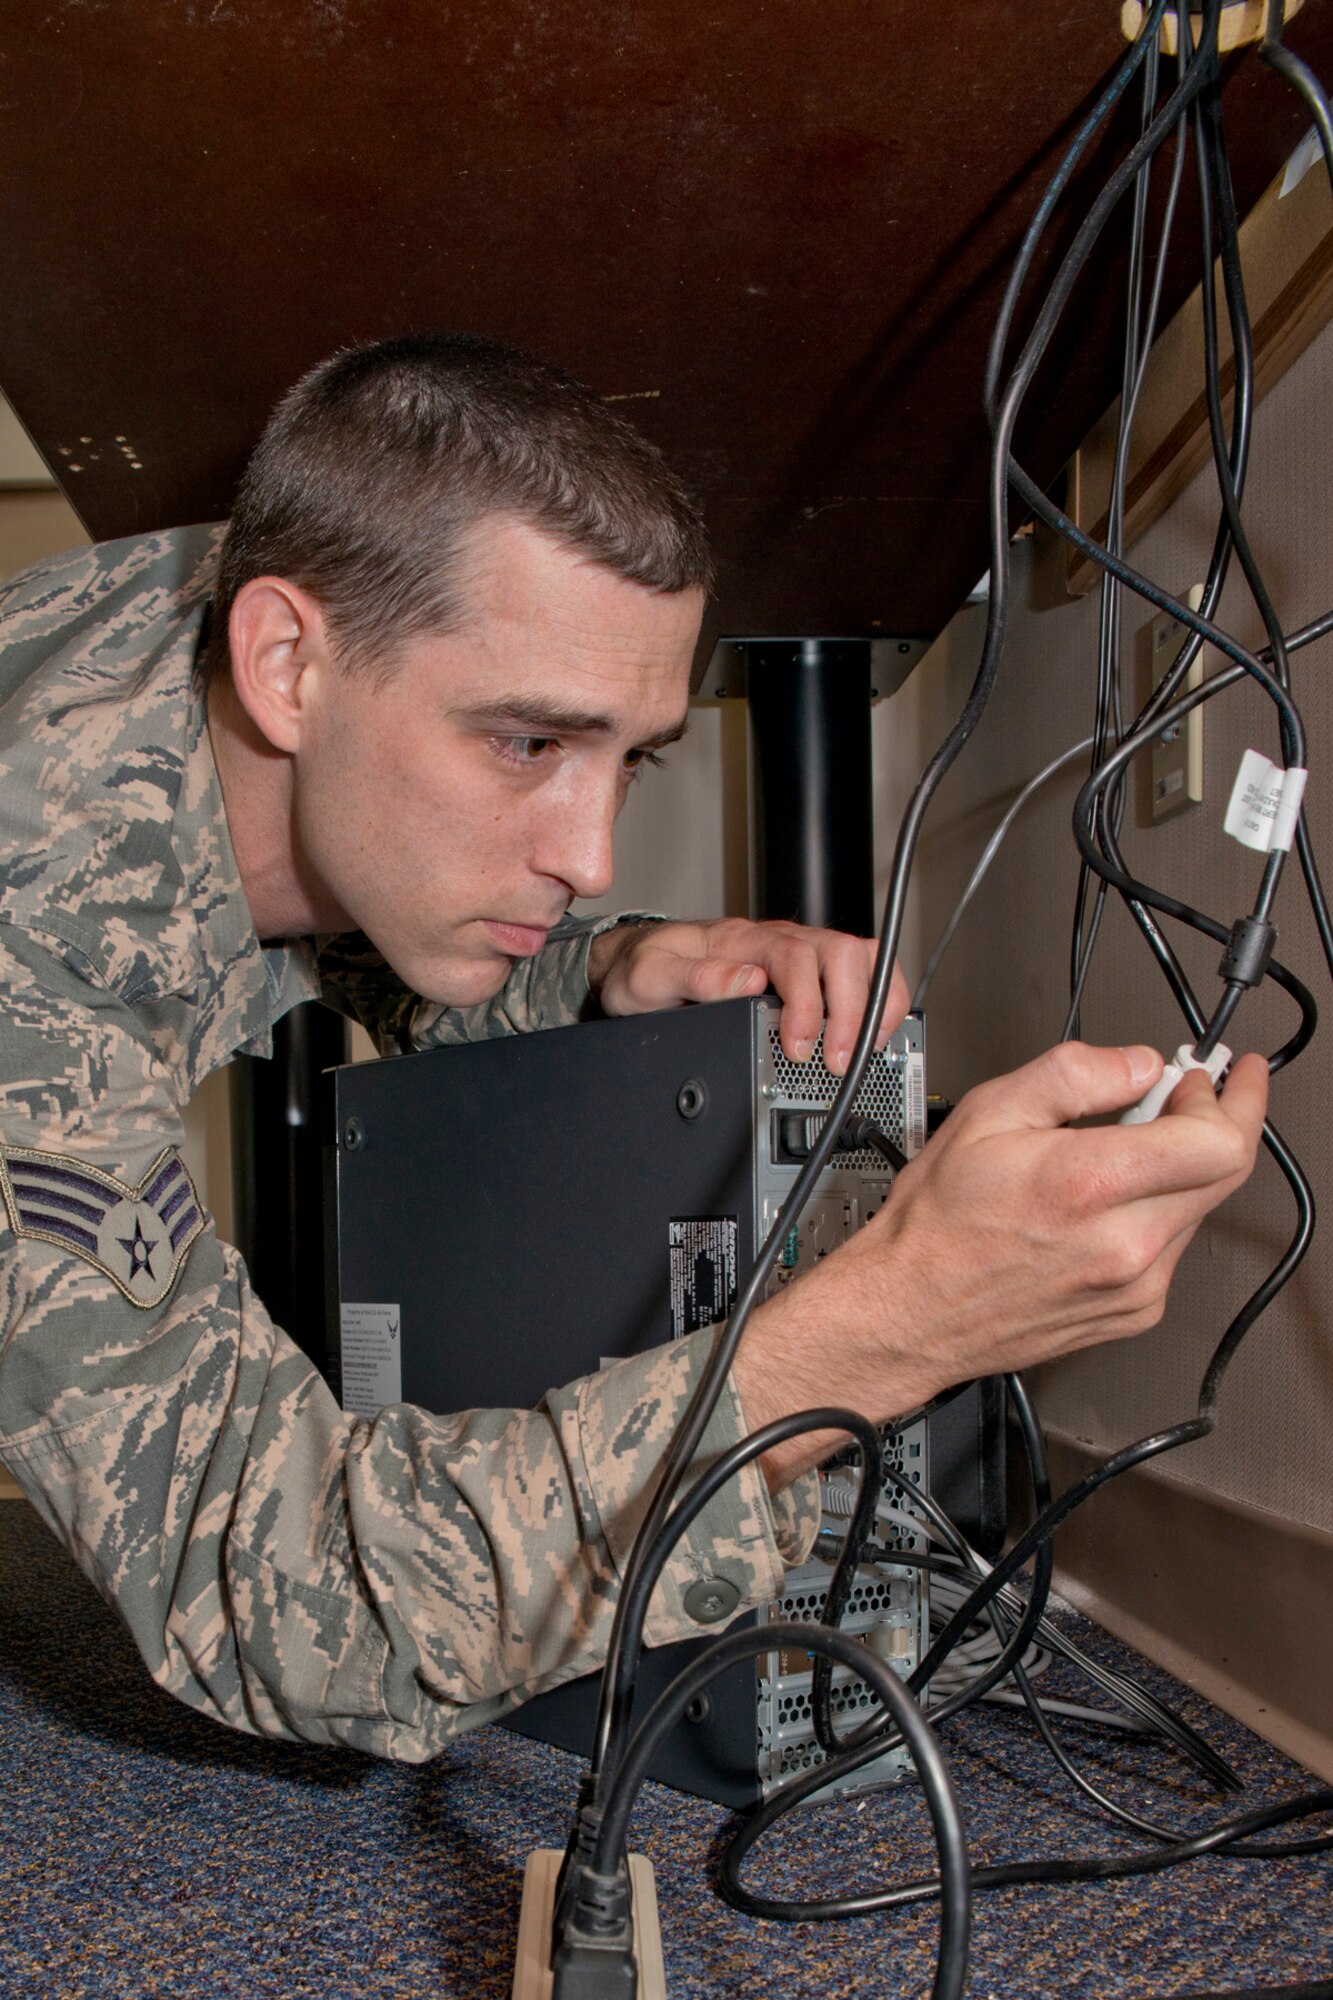 U.S. Air Force Reserve Senior Airman Justin Radford, a client systems technician assigned to the 913th Force Support Squadron, replaces a digital video interface cable with a video graphics adapter cable to connect two monitors on a computer system, Jan. 13, 2016, at Little Rock Air Force Base, Ark. Radford returned to the 913th FSS last week after graduating a 13-week technical school at Keesler Air Force Base, Miss. He will be supports the 913th Airlift Group as an Air Reserve Technician by fixing and installing computer systems in addition to installing software, maintaining hardware and adding new computers to the unit network. (U.S. Air Force photo by Master Sgt. Jeff Walston/Released)    